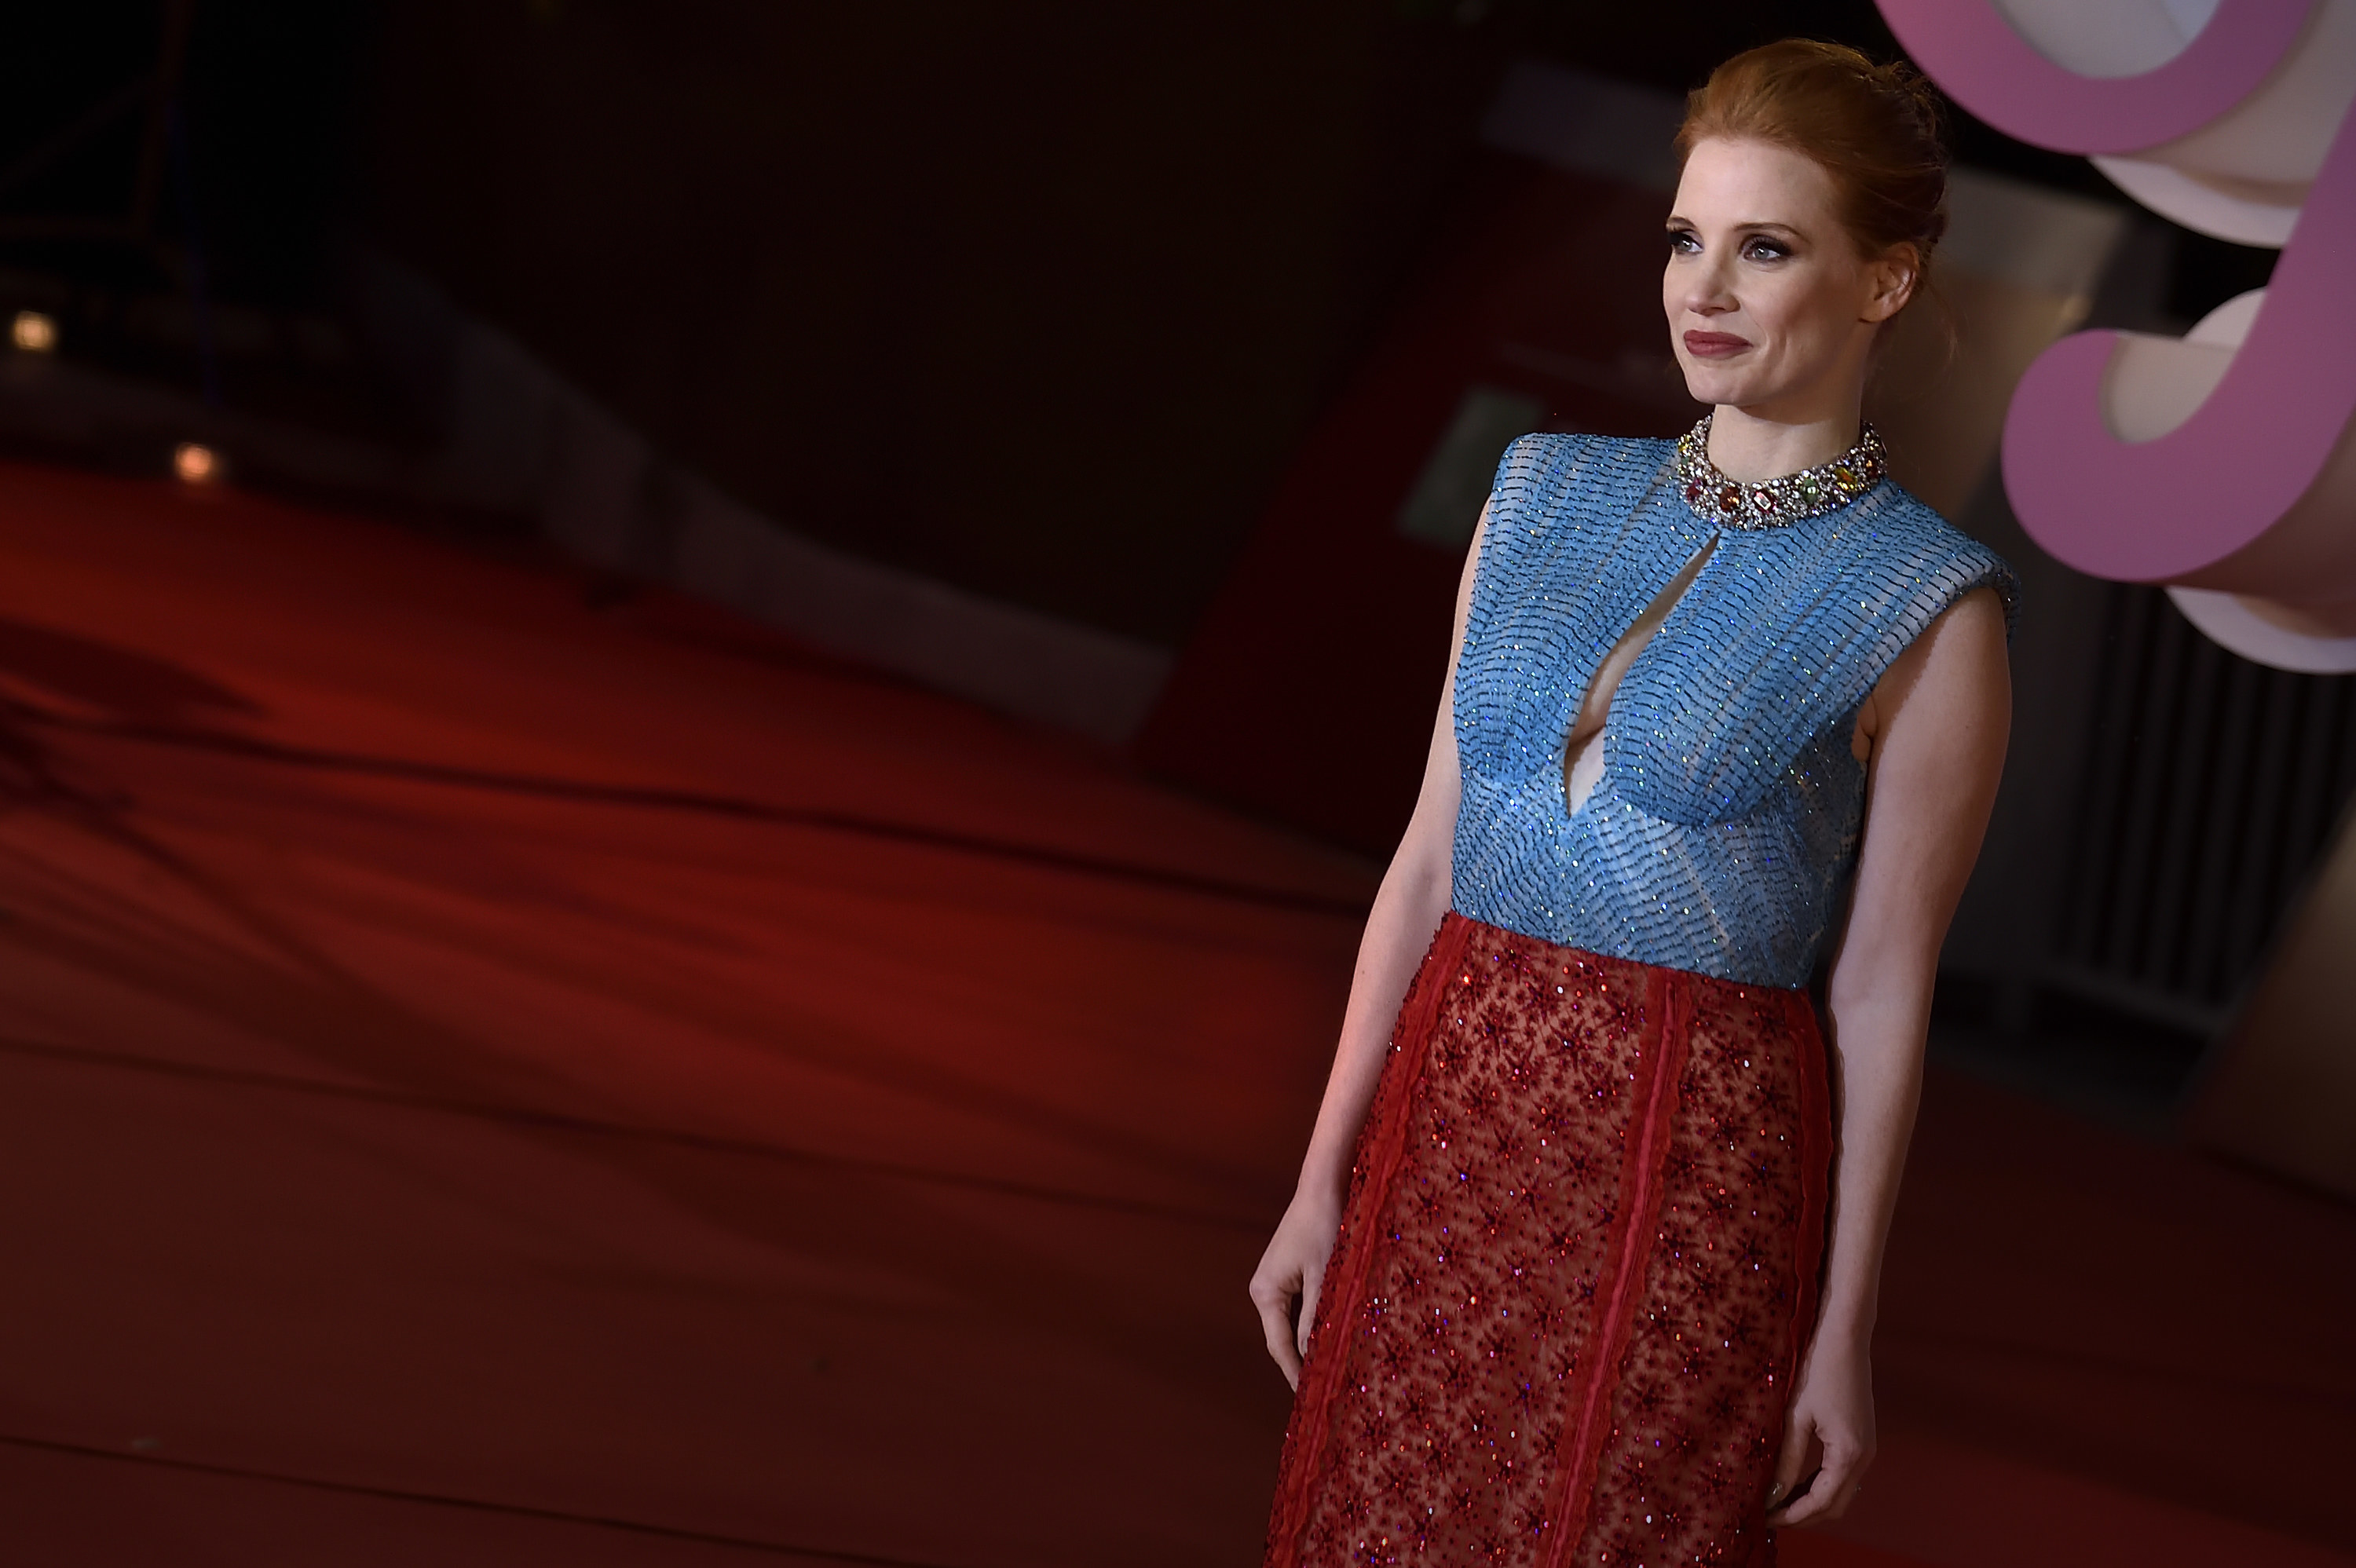 Jessica Chastain at Rome Film Fest in 2021 in a two-toned dress with a keyhole cutout